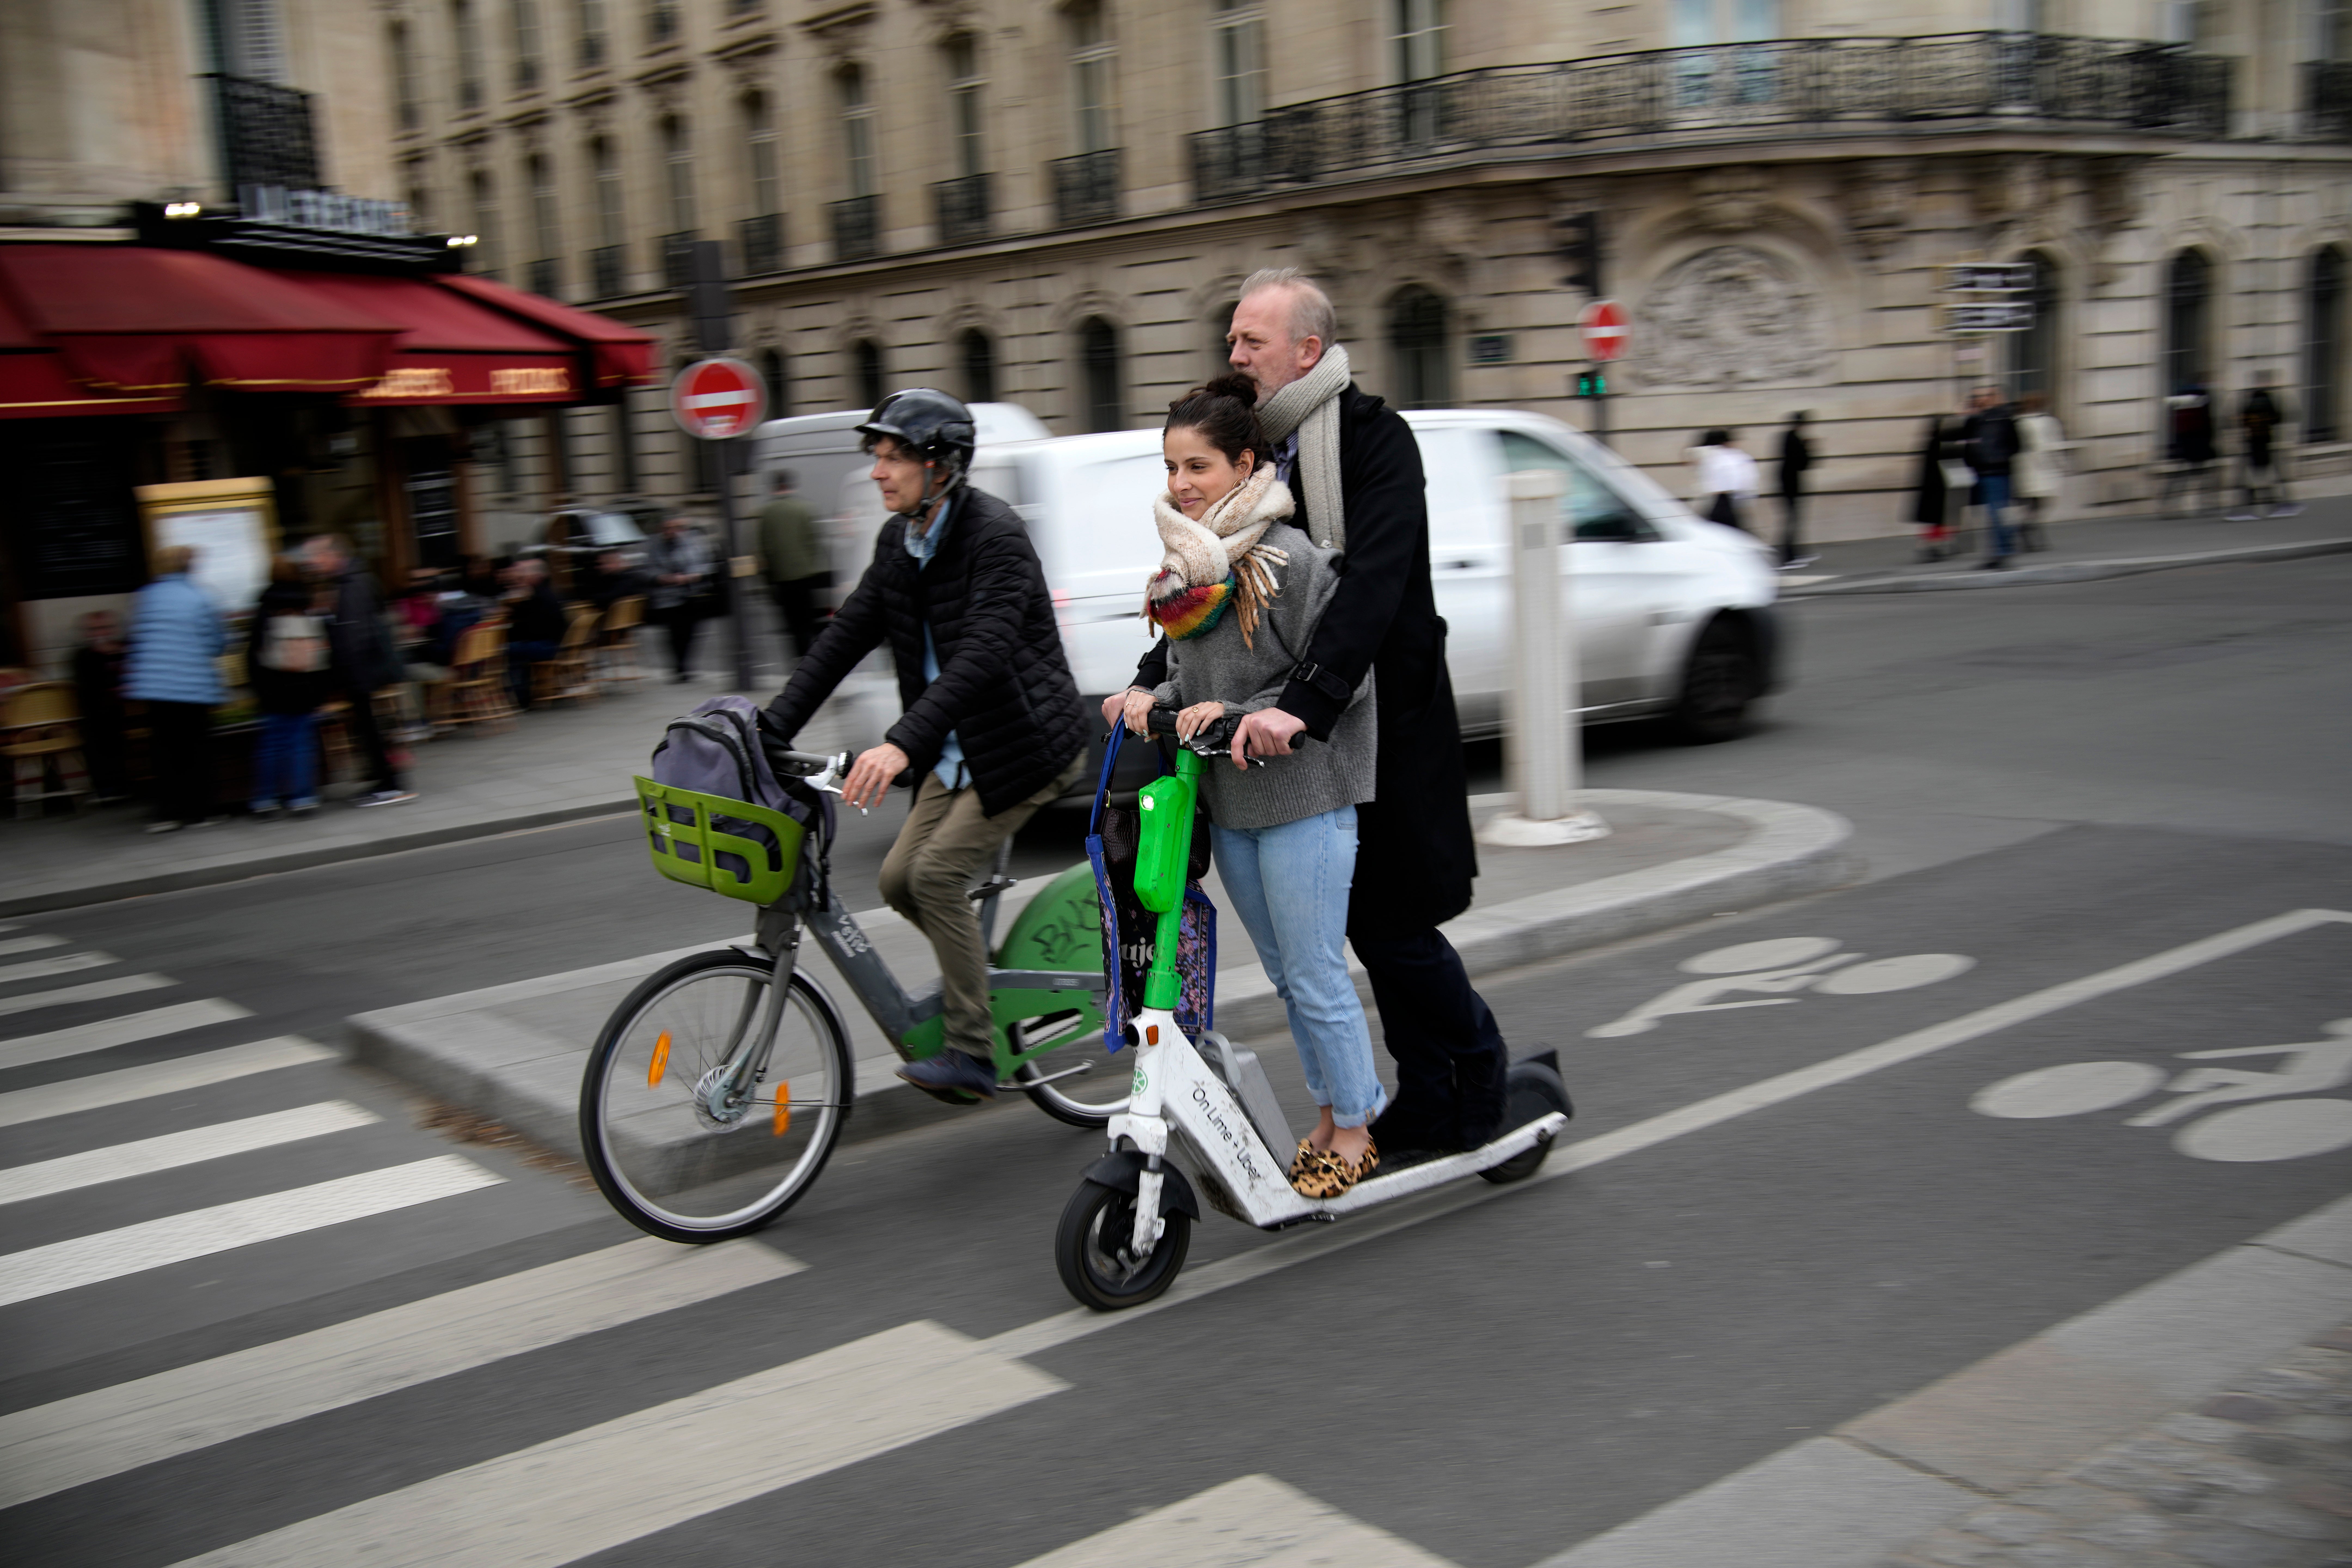 E-scooters on the streets of Paris will soon be a thing of the past